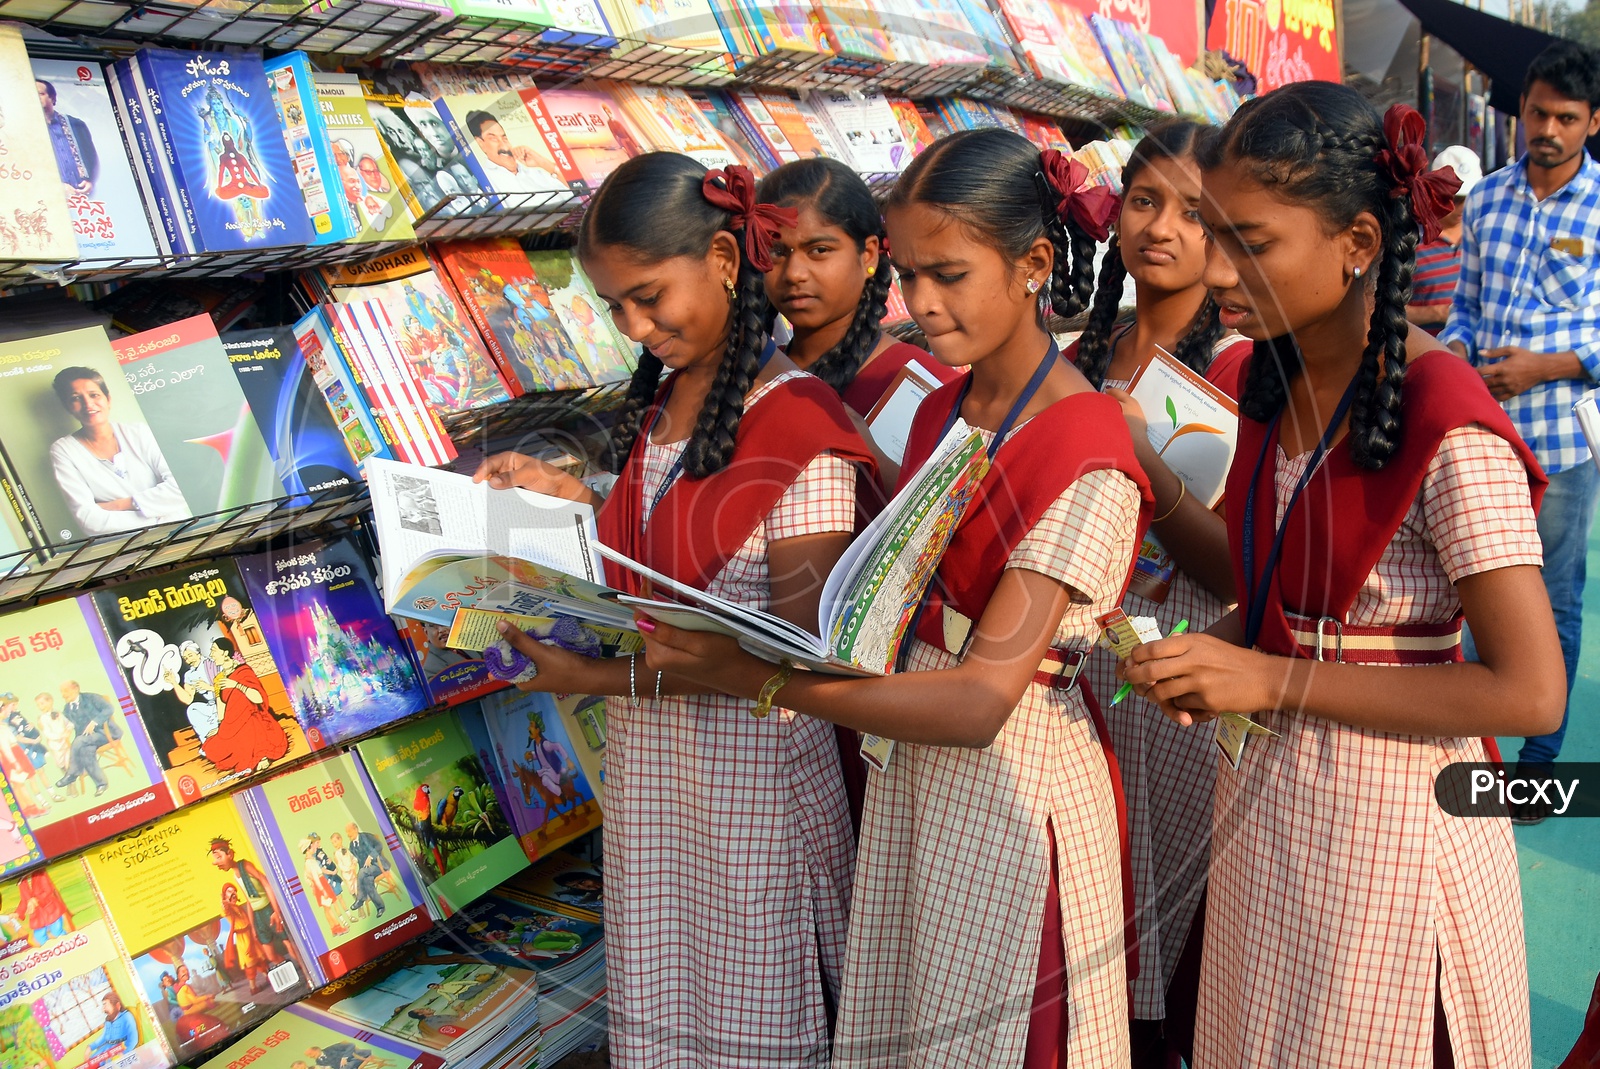 Girl Students checking out books in a book sotre